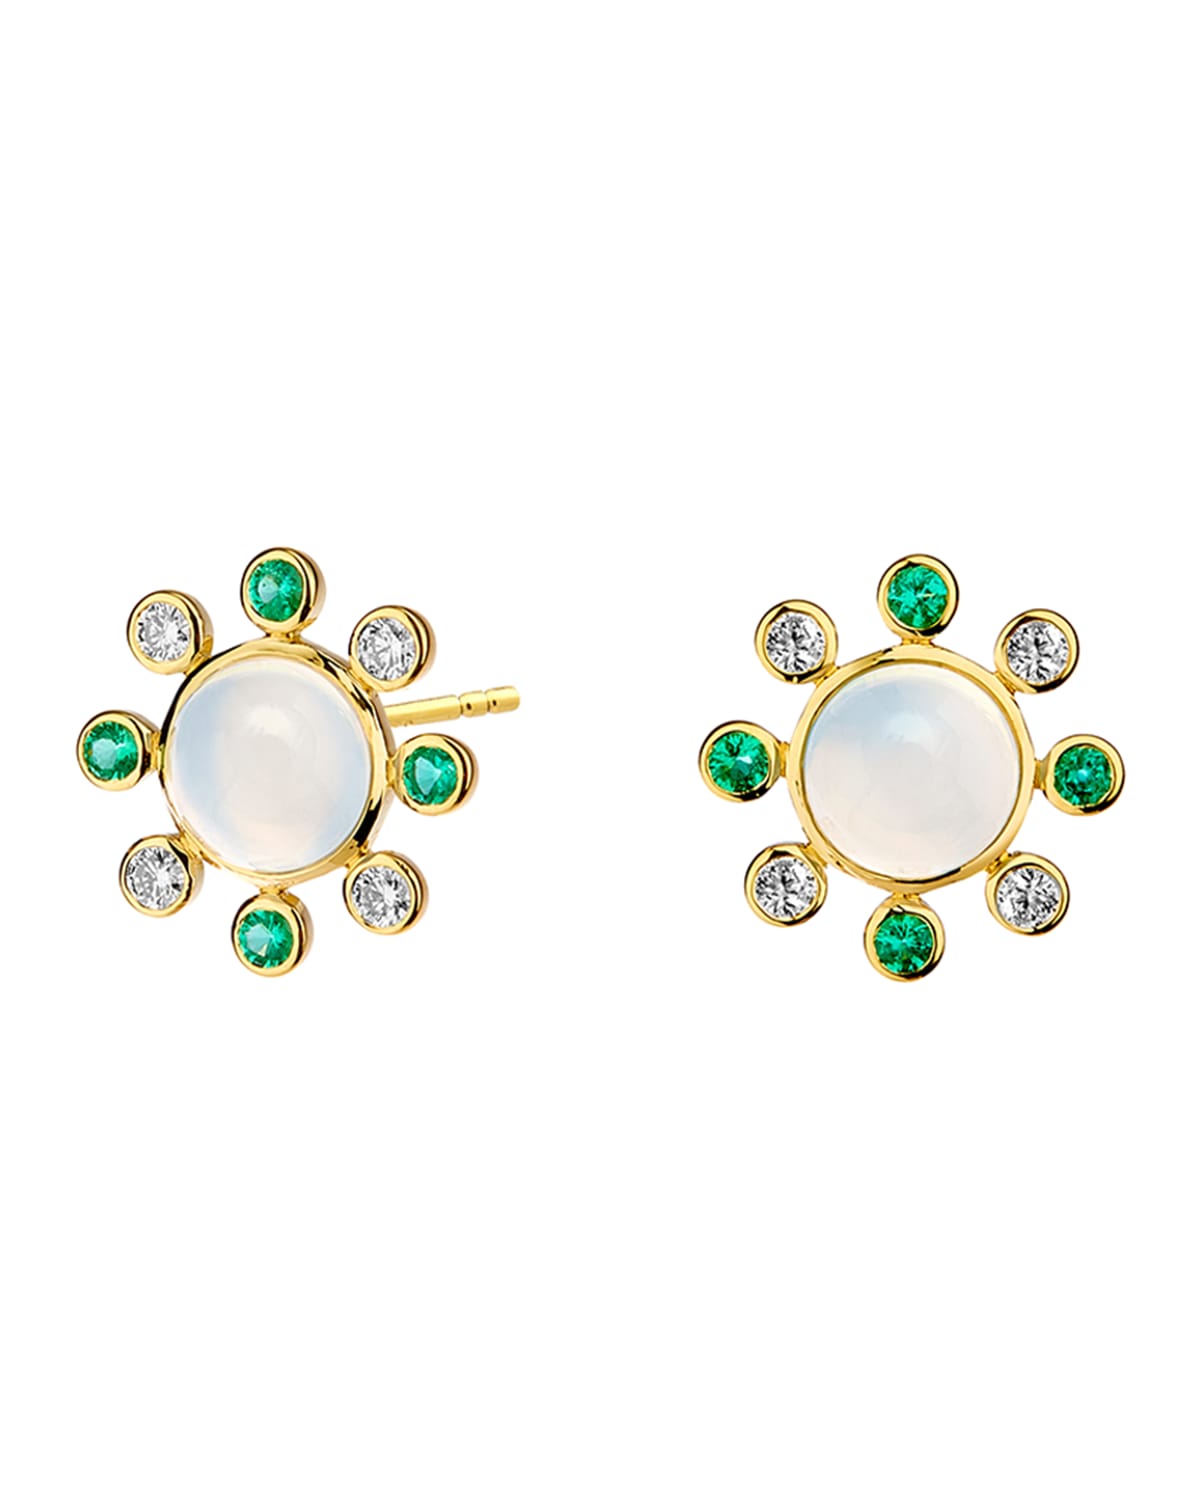 Syna 18k Moon Quartz Earrings With Emeralds And Diamonds